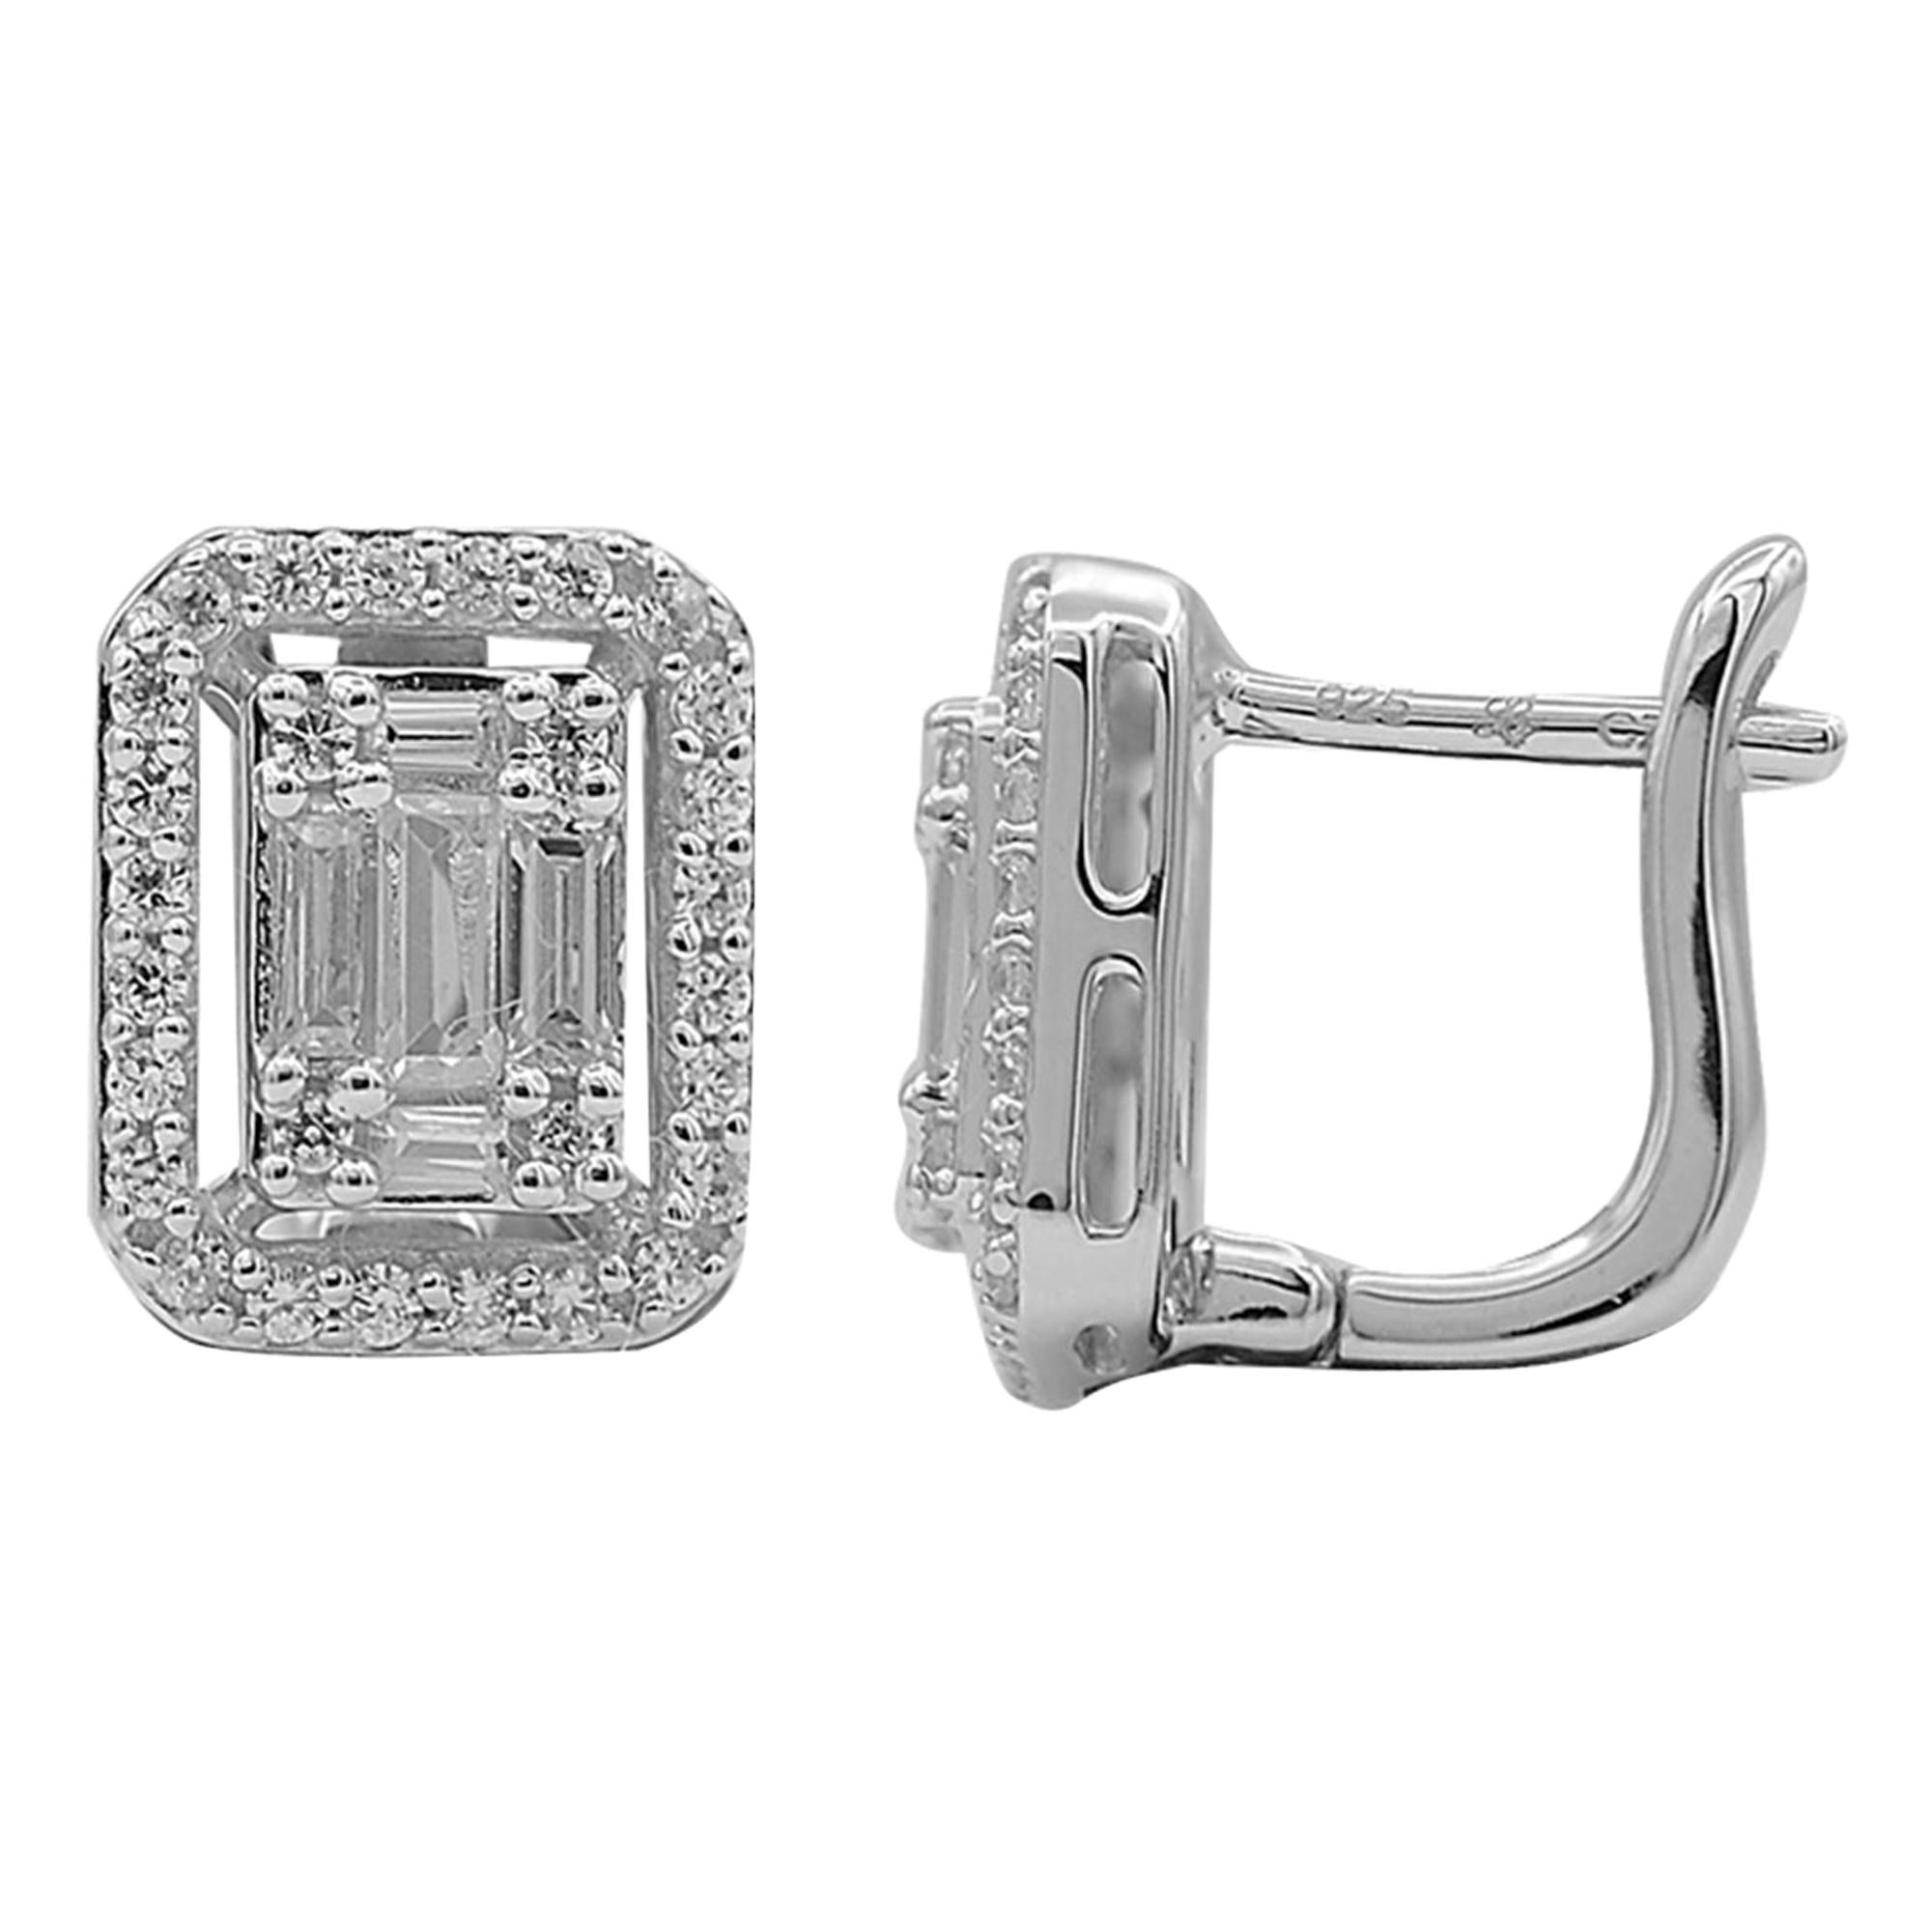 TJD 0.50 Carat Round and Baguette Diamond 14K White Gold Rectangle Stud Earrings For Sale